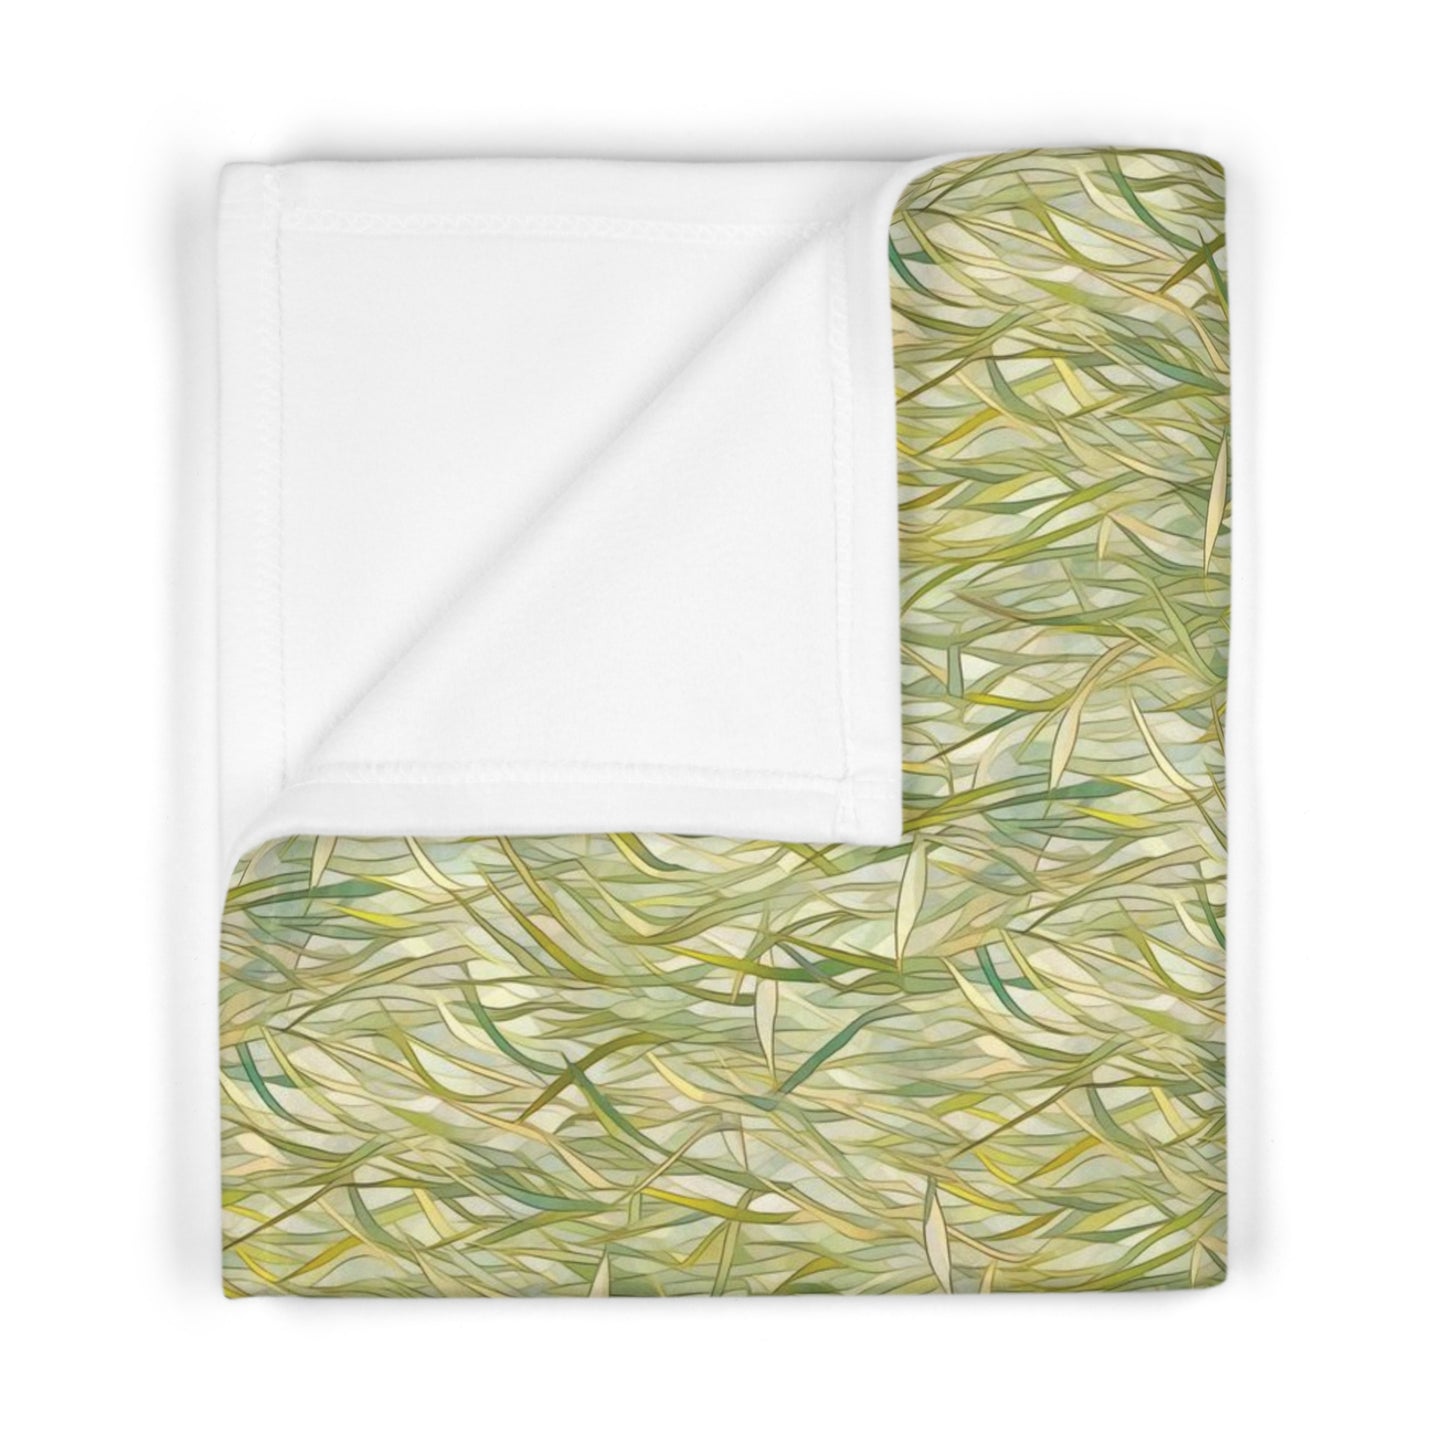 Stained Glass Plants Soft Fleece Boho Baby Blanket, Silver Sage Grasses Print